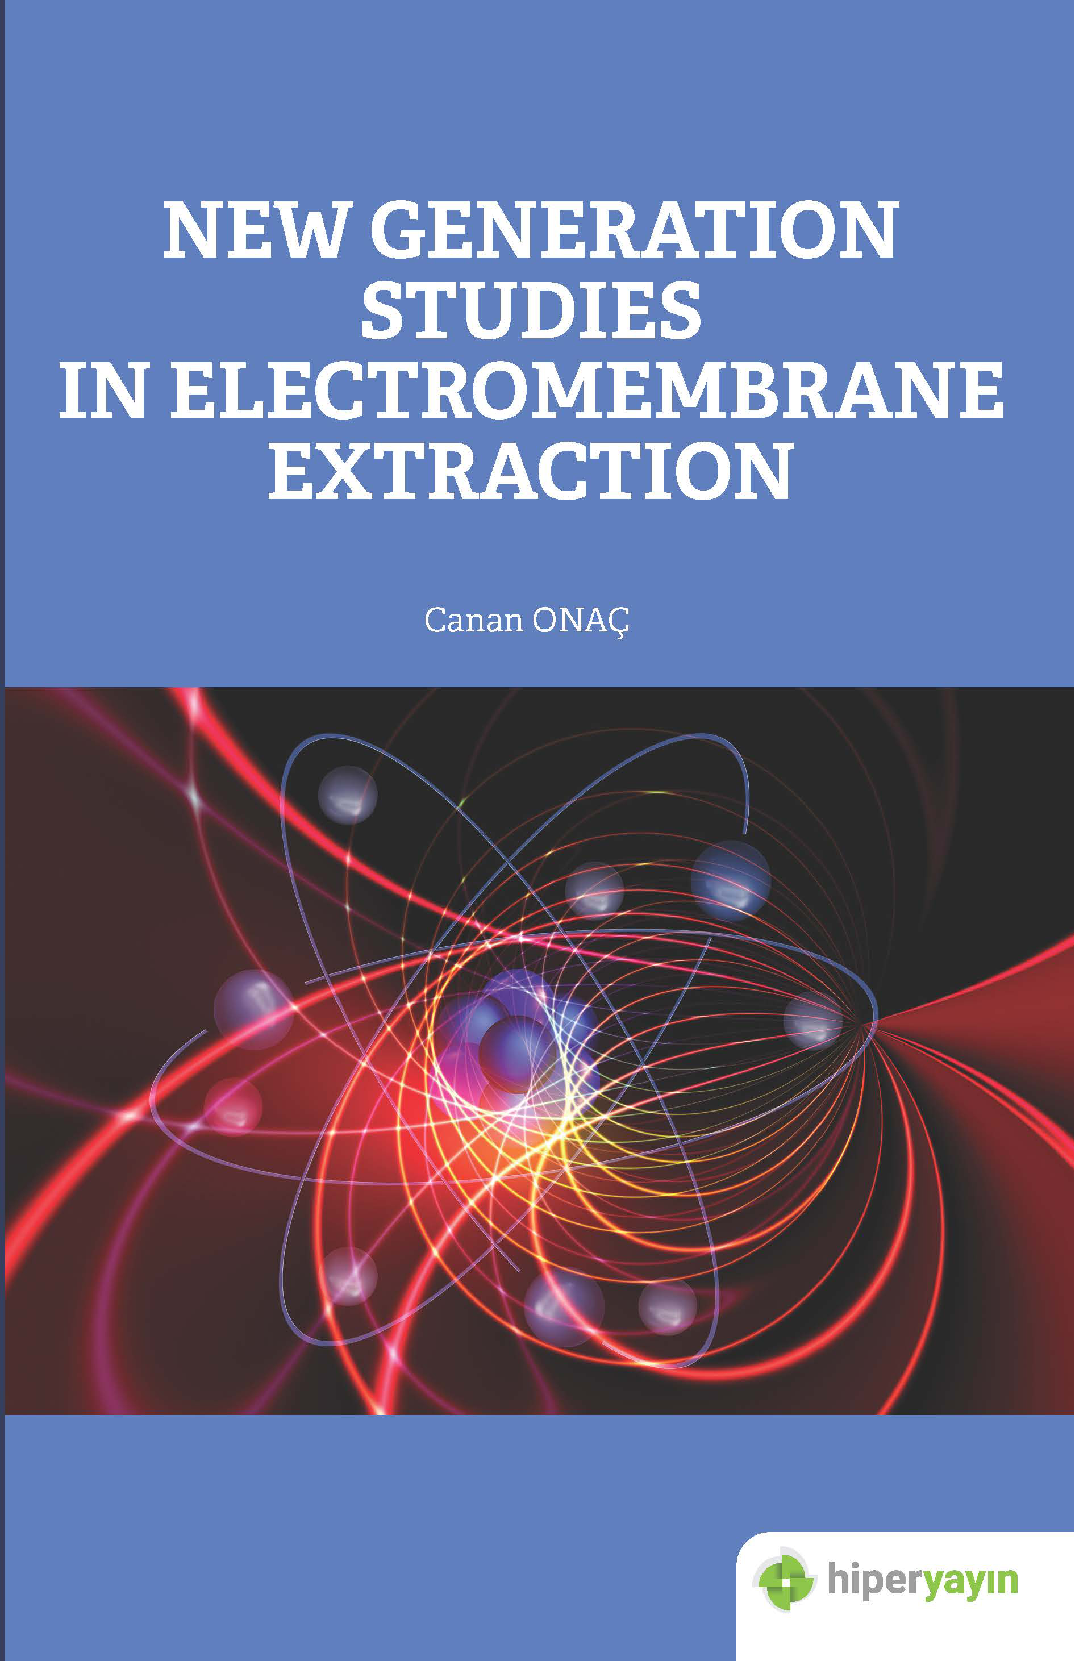 New Generation Studies In Electromembrane Extraction